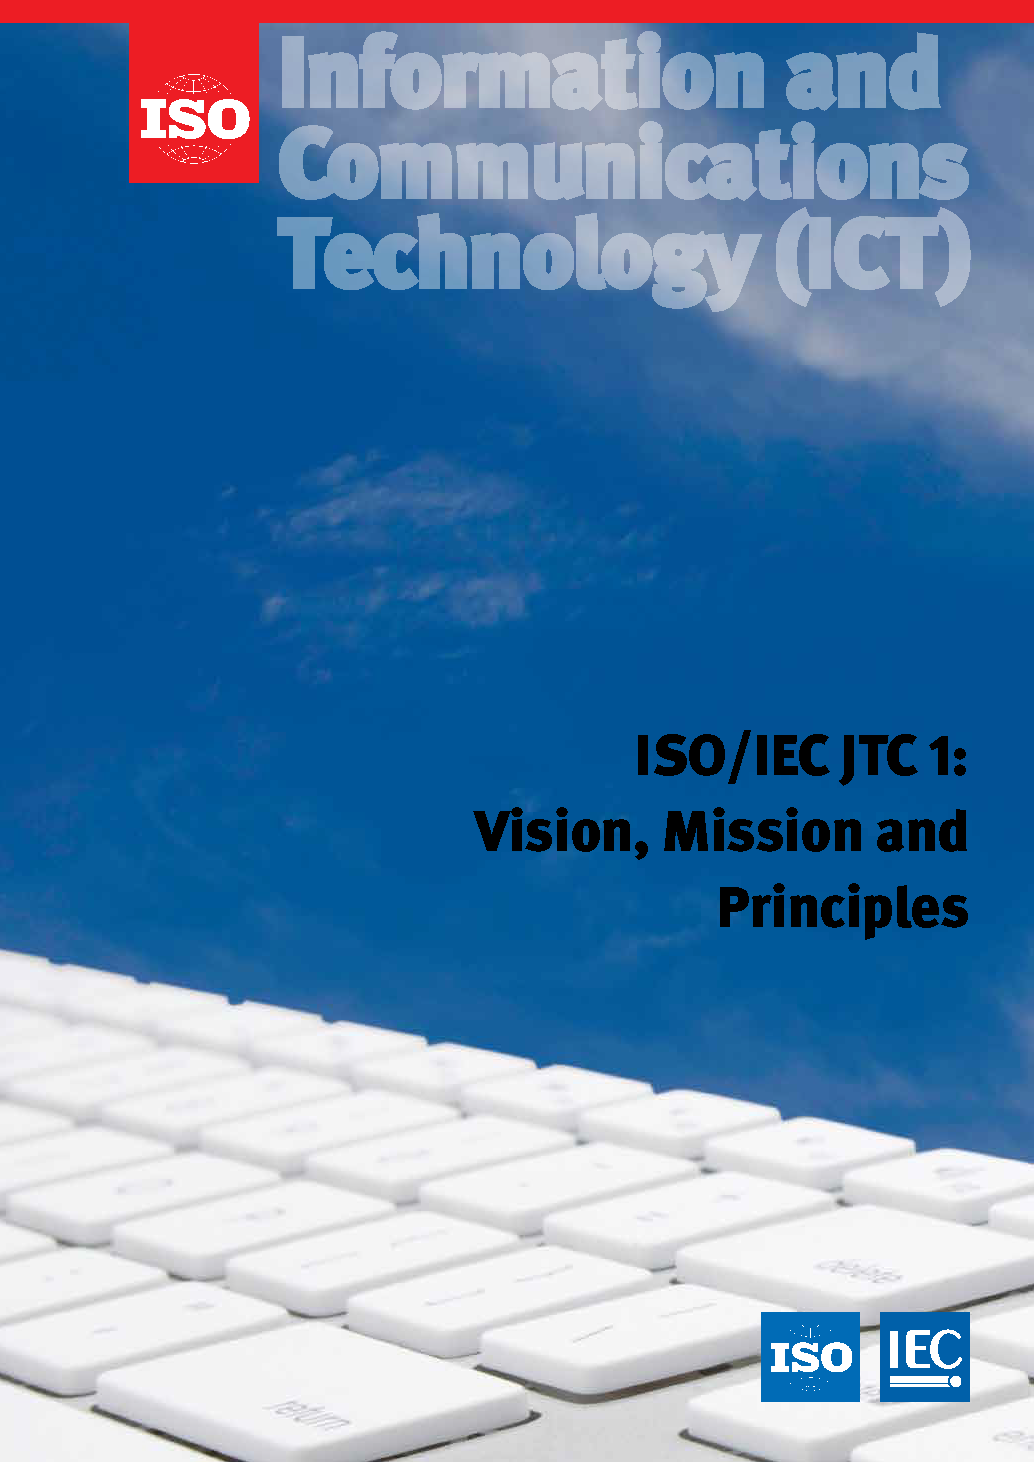 JTC1 Vision, Mission and Principles